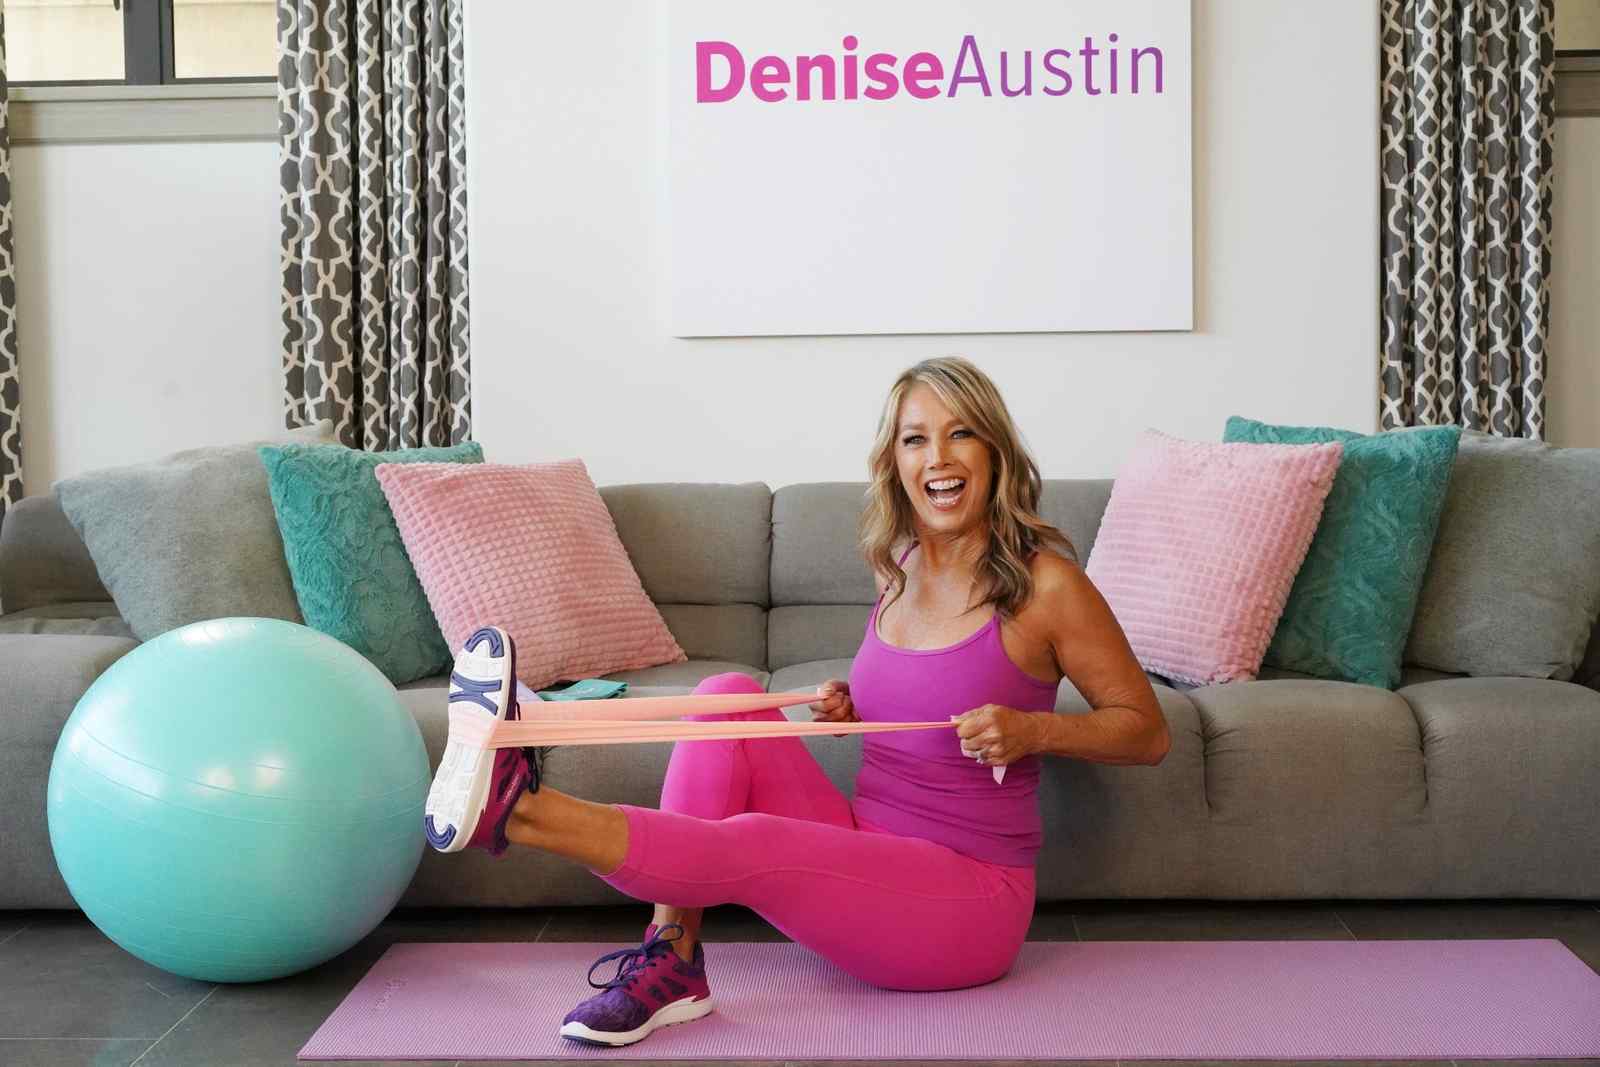 10-Minute Trim & Tone with Ball and Bands!